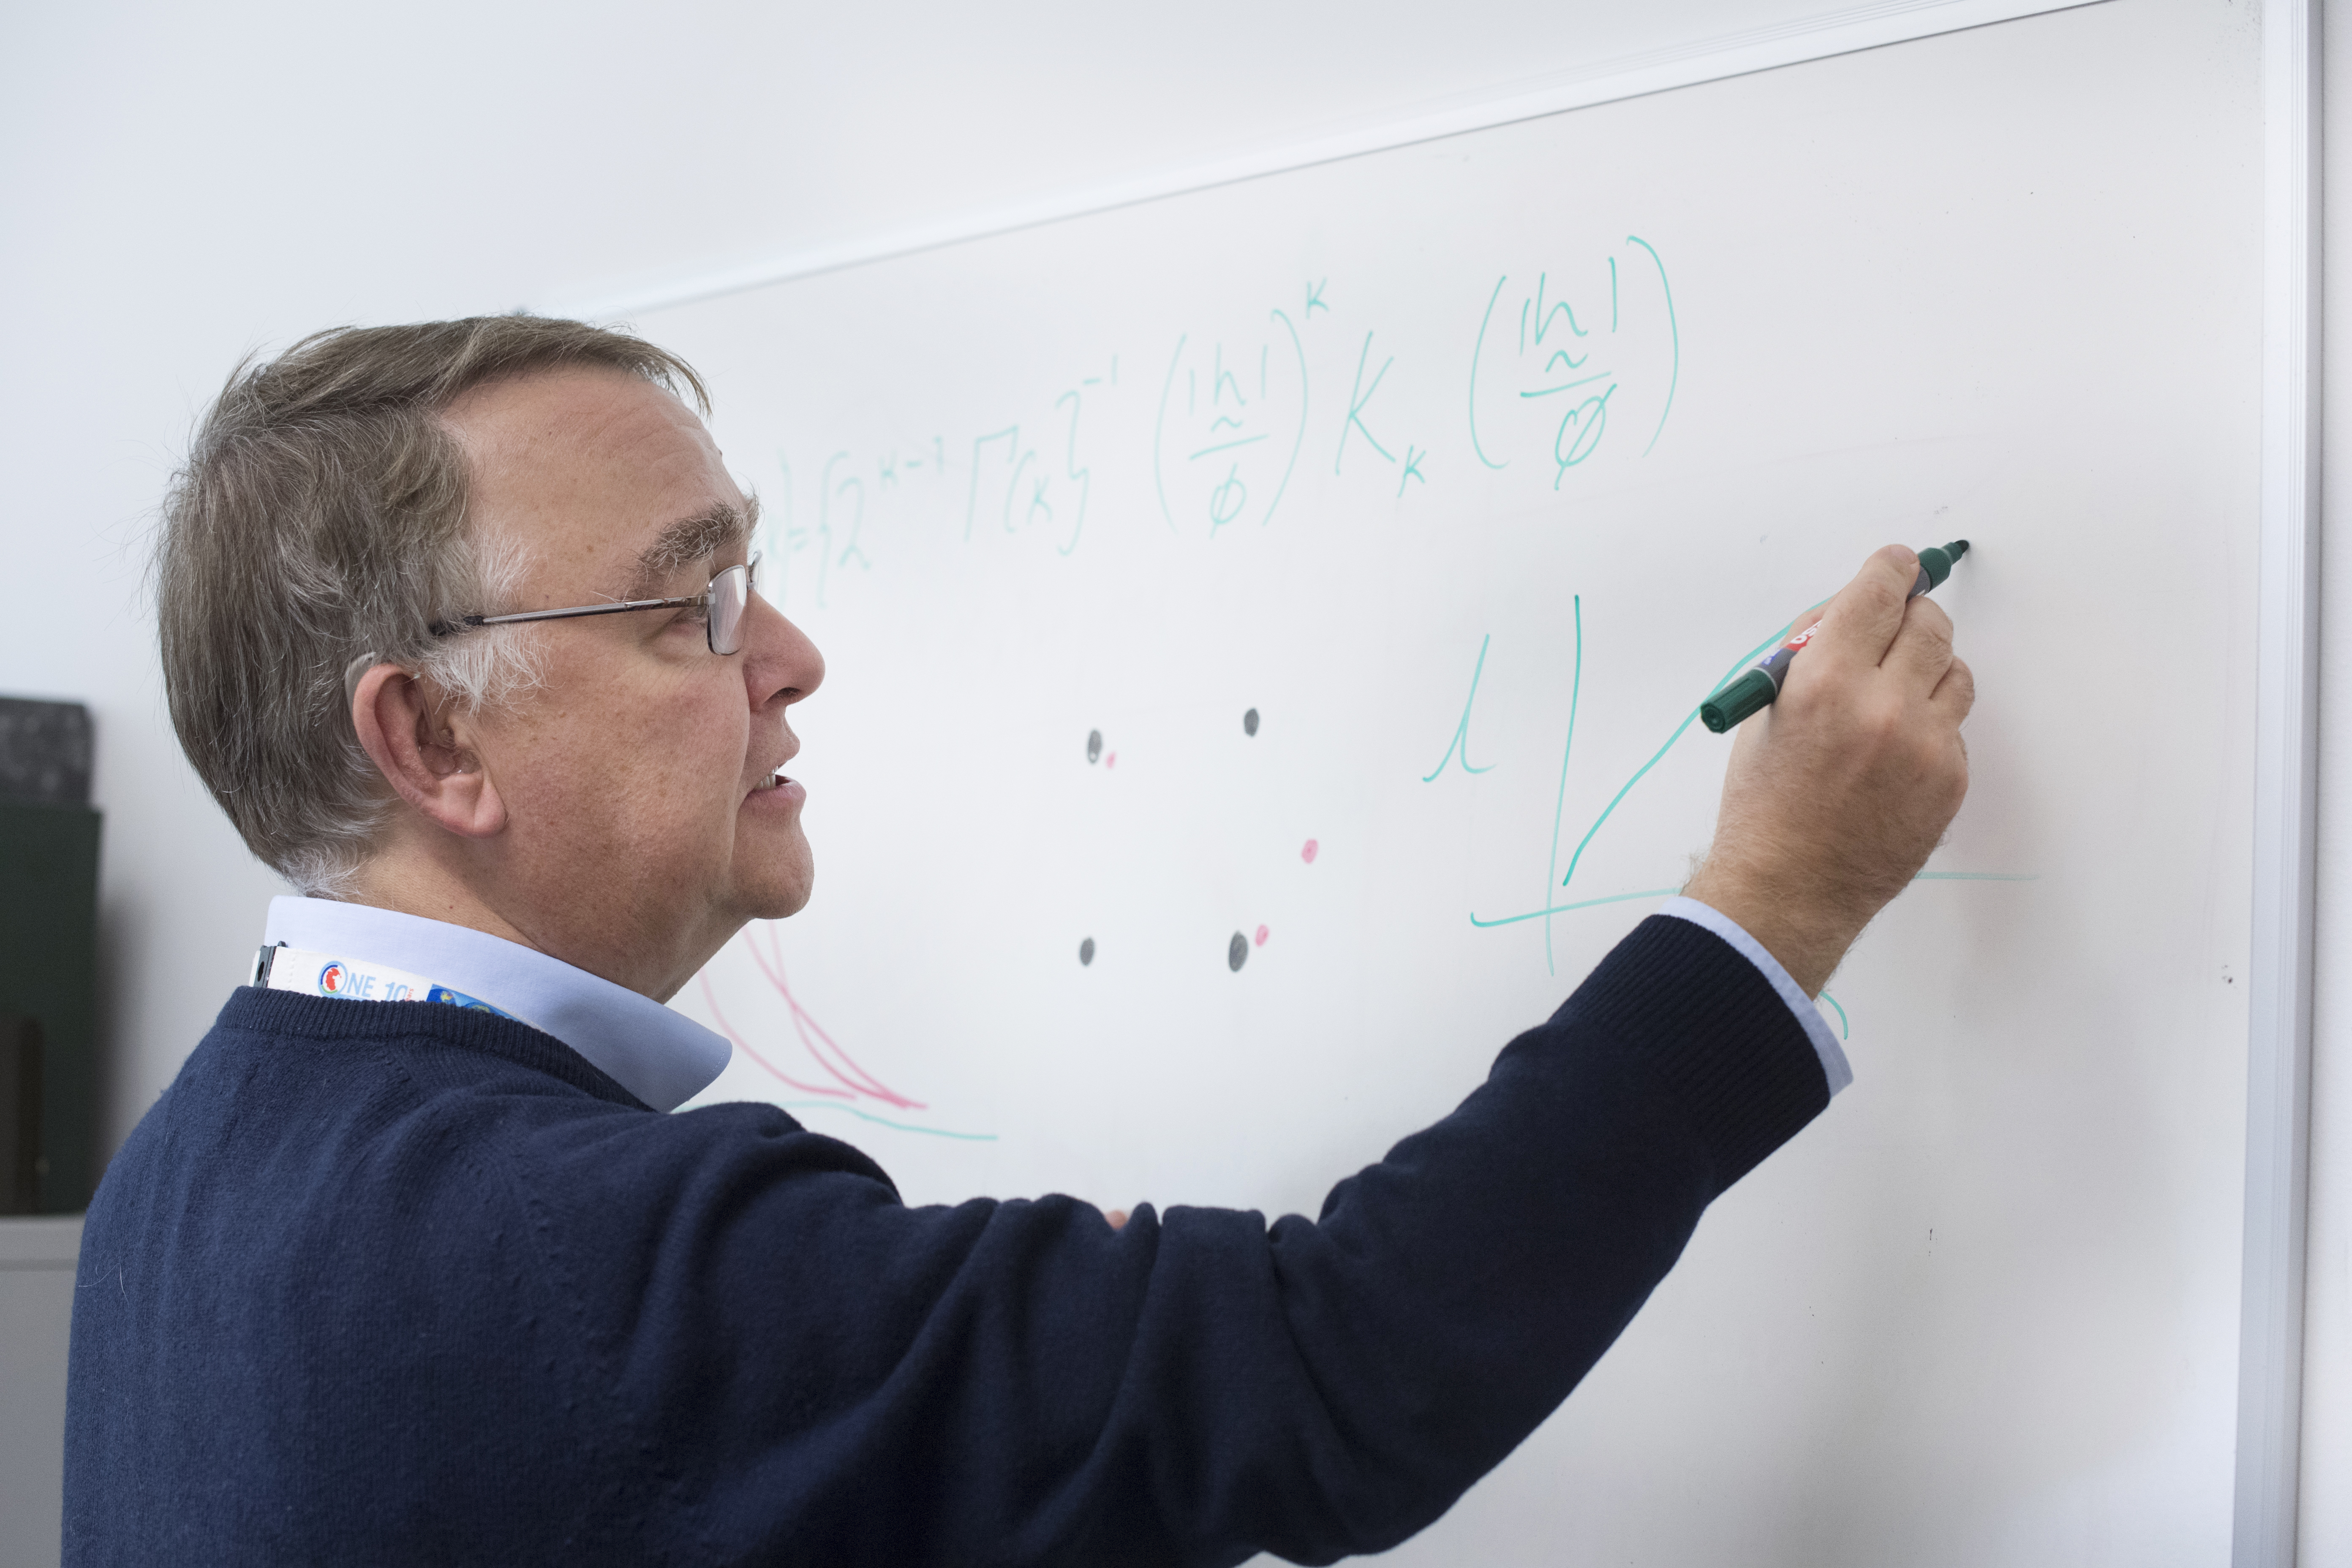 A researcher in a blue jumper writes on a whiteboard